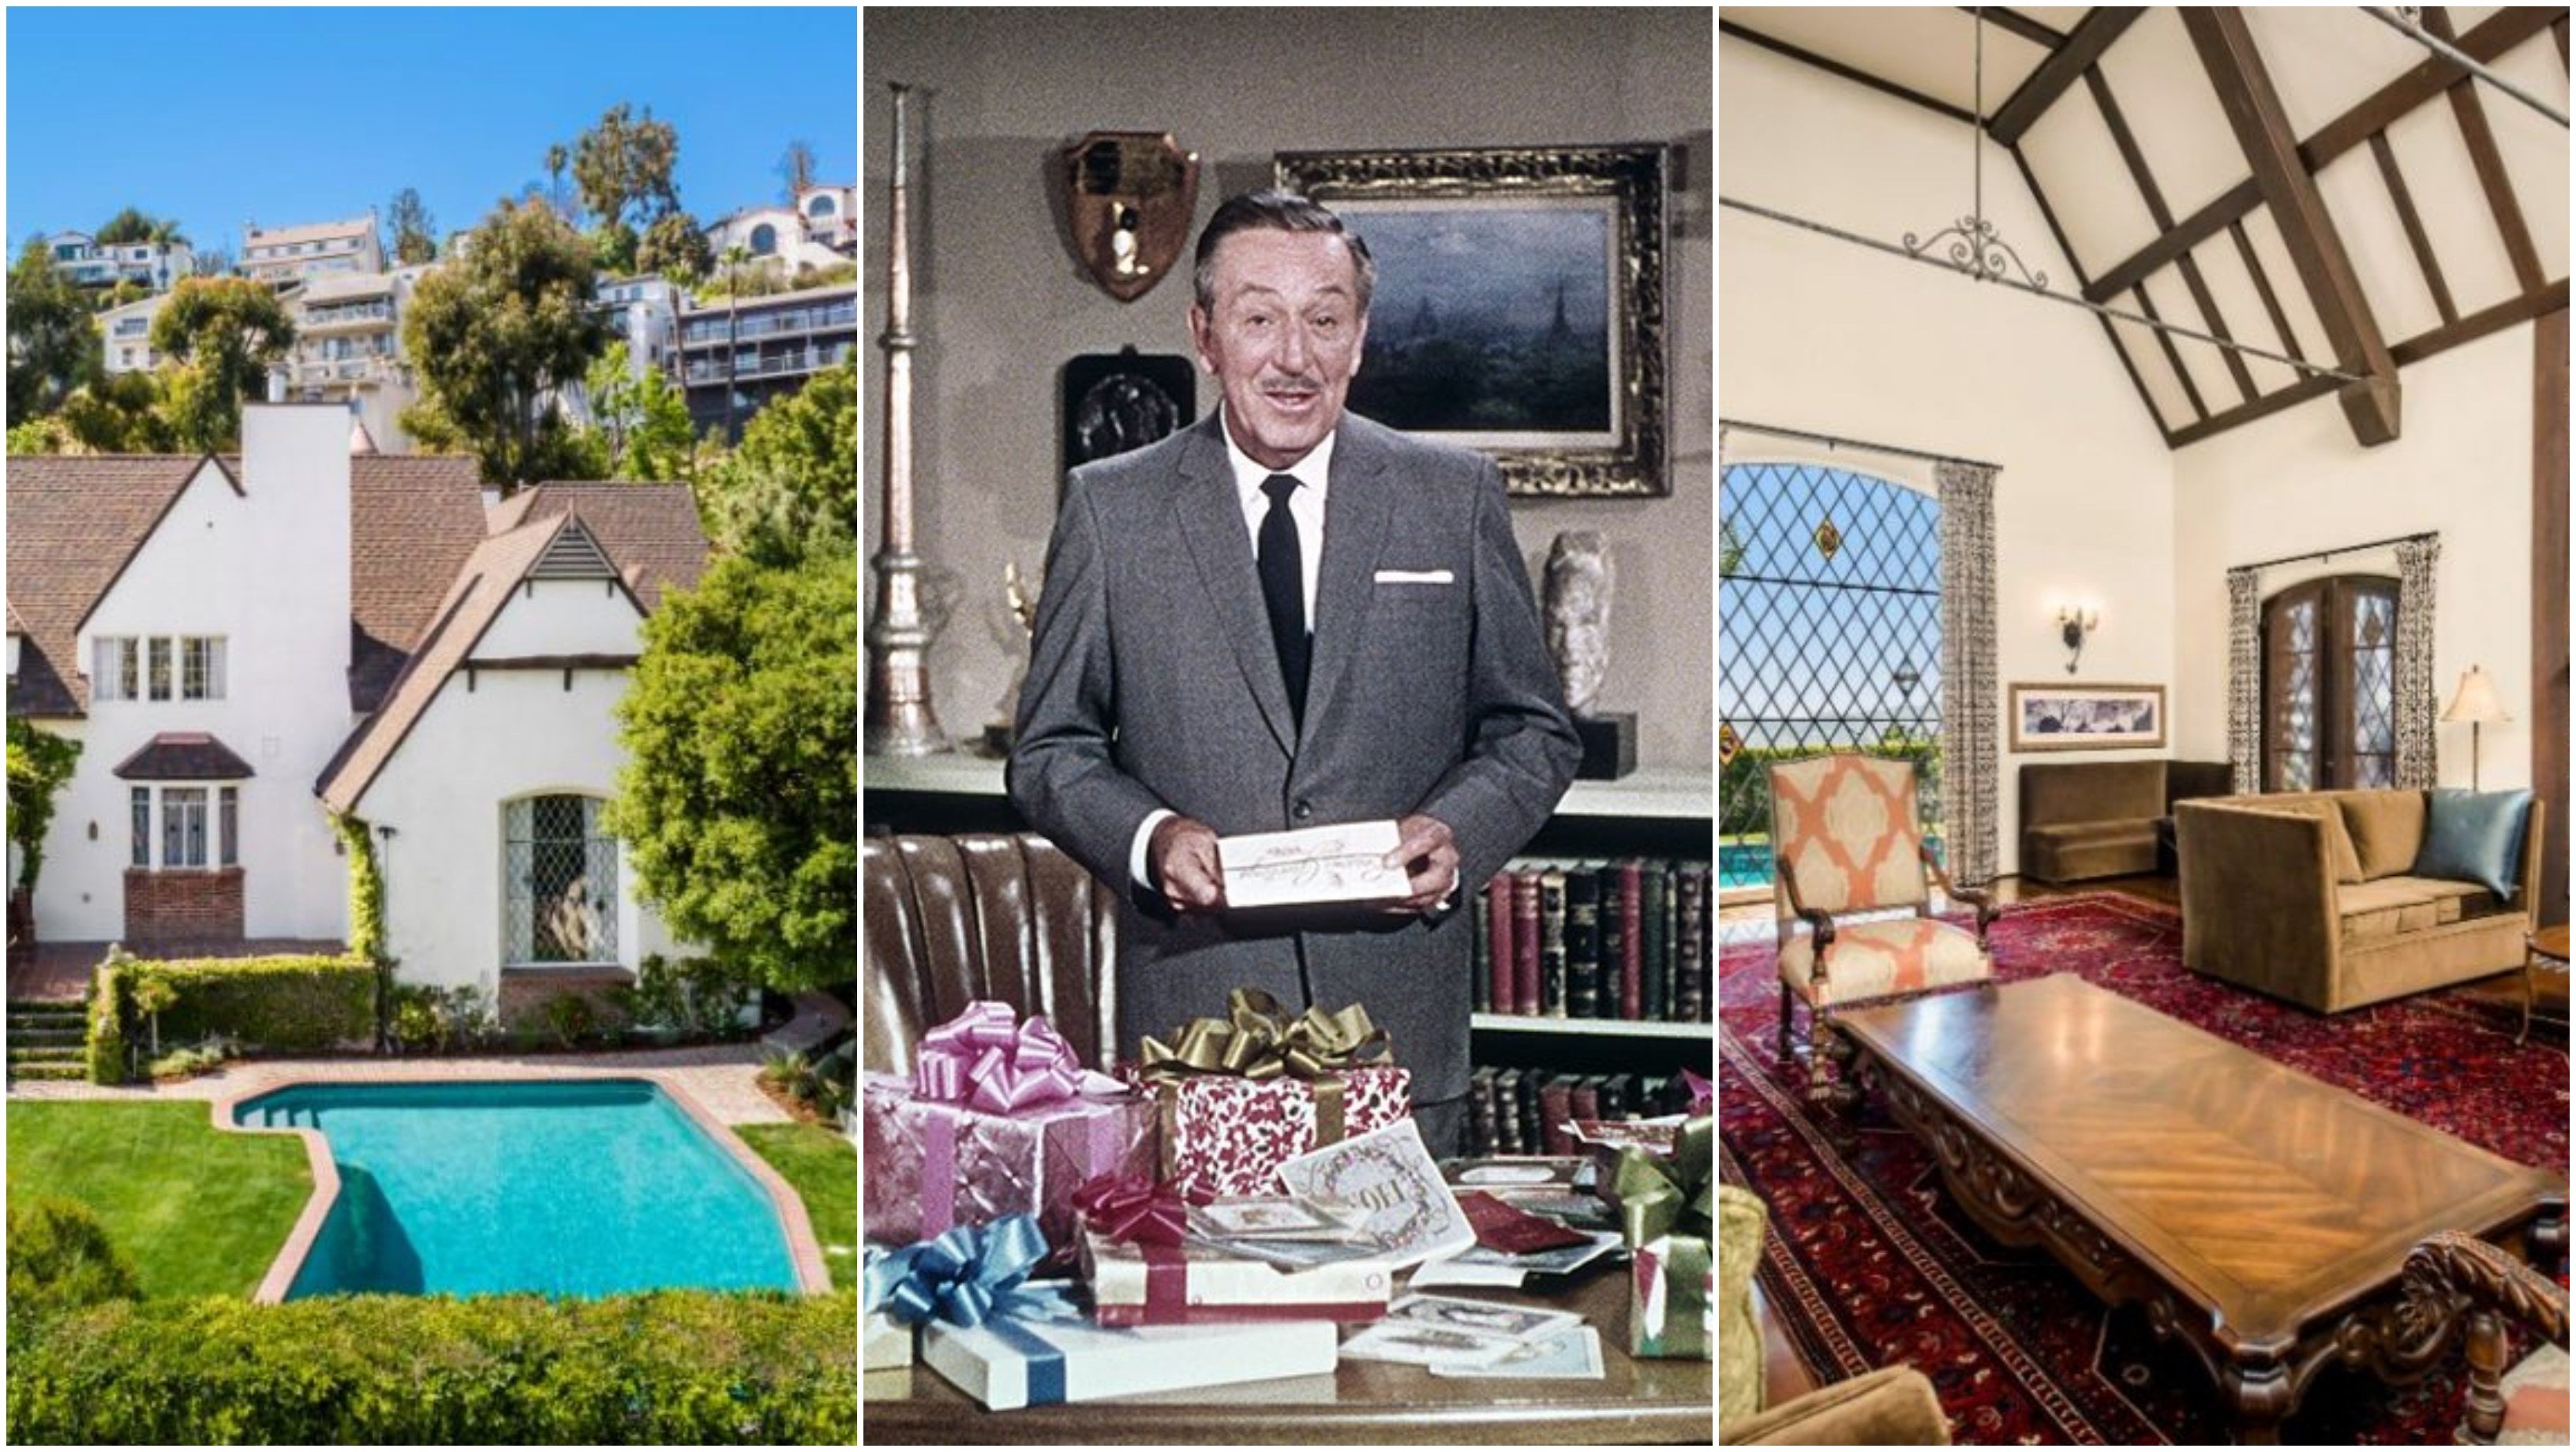 Walt Disney’s former home features a swimming pool and fairy tale-like interiors. Photos: TheLuxLevel; @waltdisneyarchives/Instagram